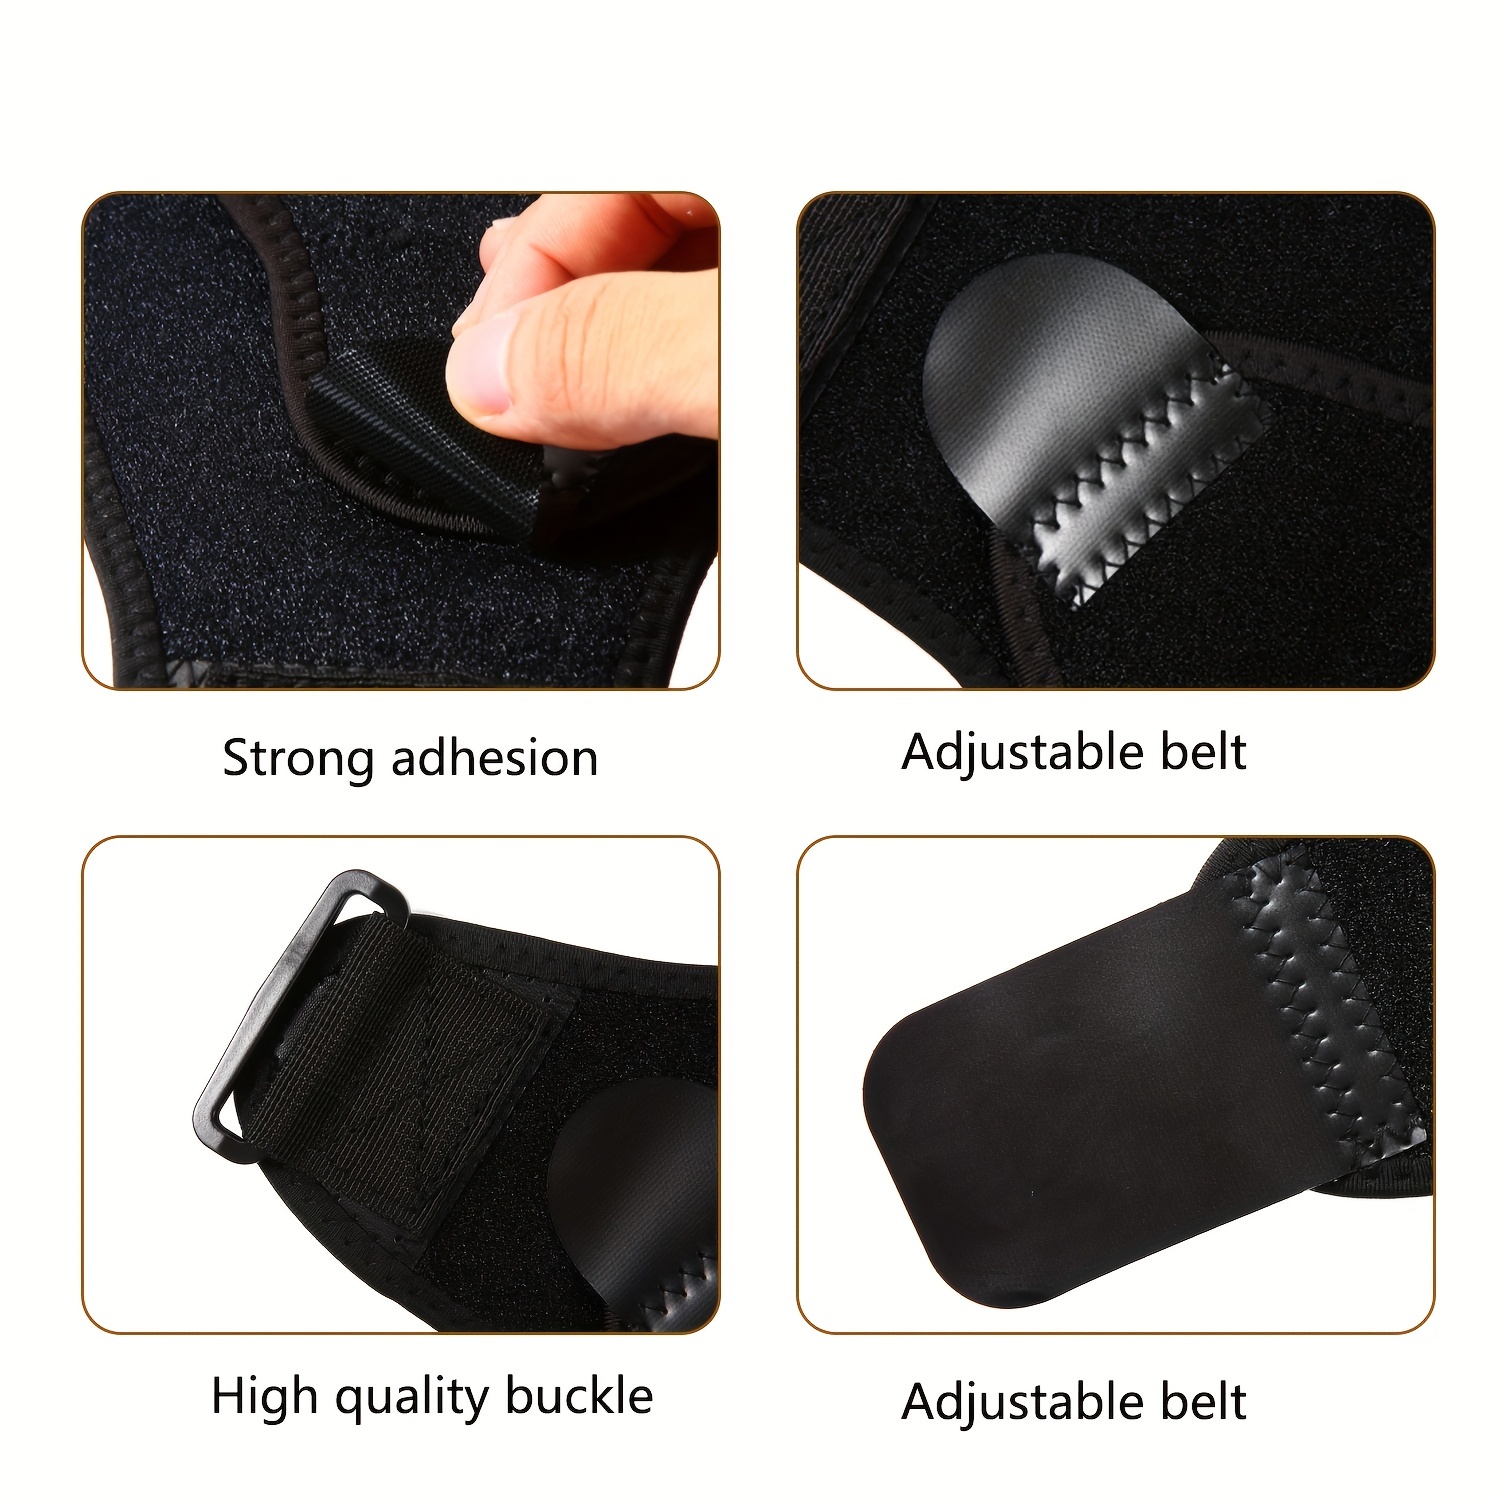 Care Shoulder Stability Brace with Pressure Pad Light and Breathable  Neoprene Shoulder Support for Rotator Cuff, Dislocated AC Joint, Labrum  Tear